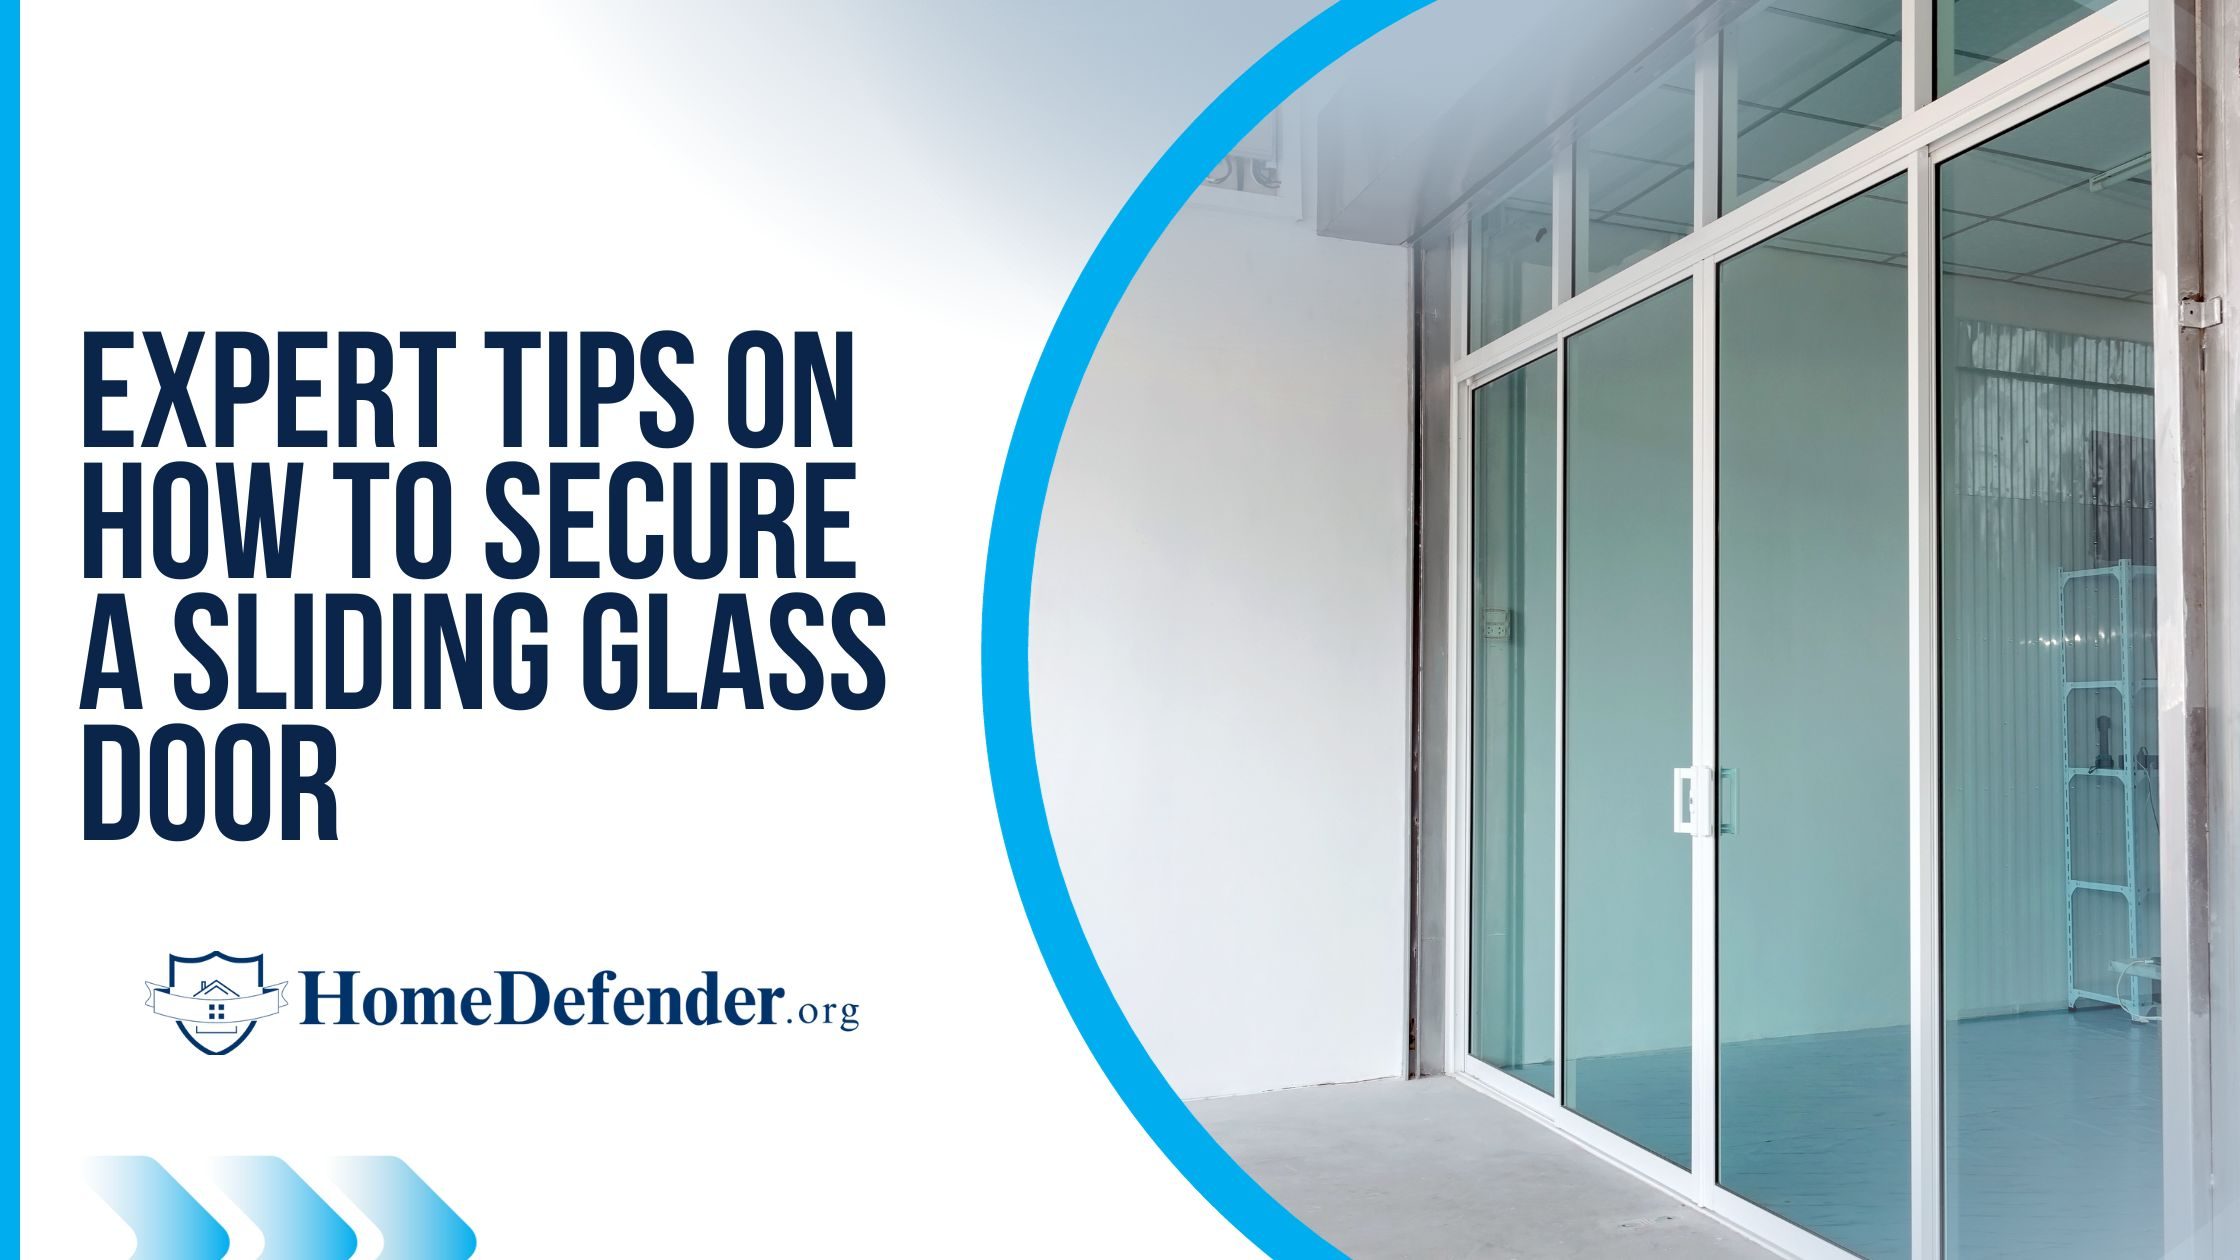 Expert Tips on How to Secure a Sliding Glass Door